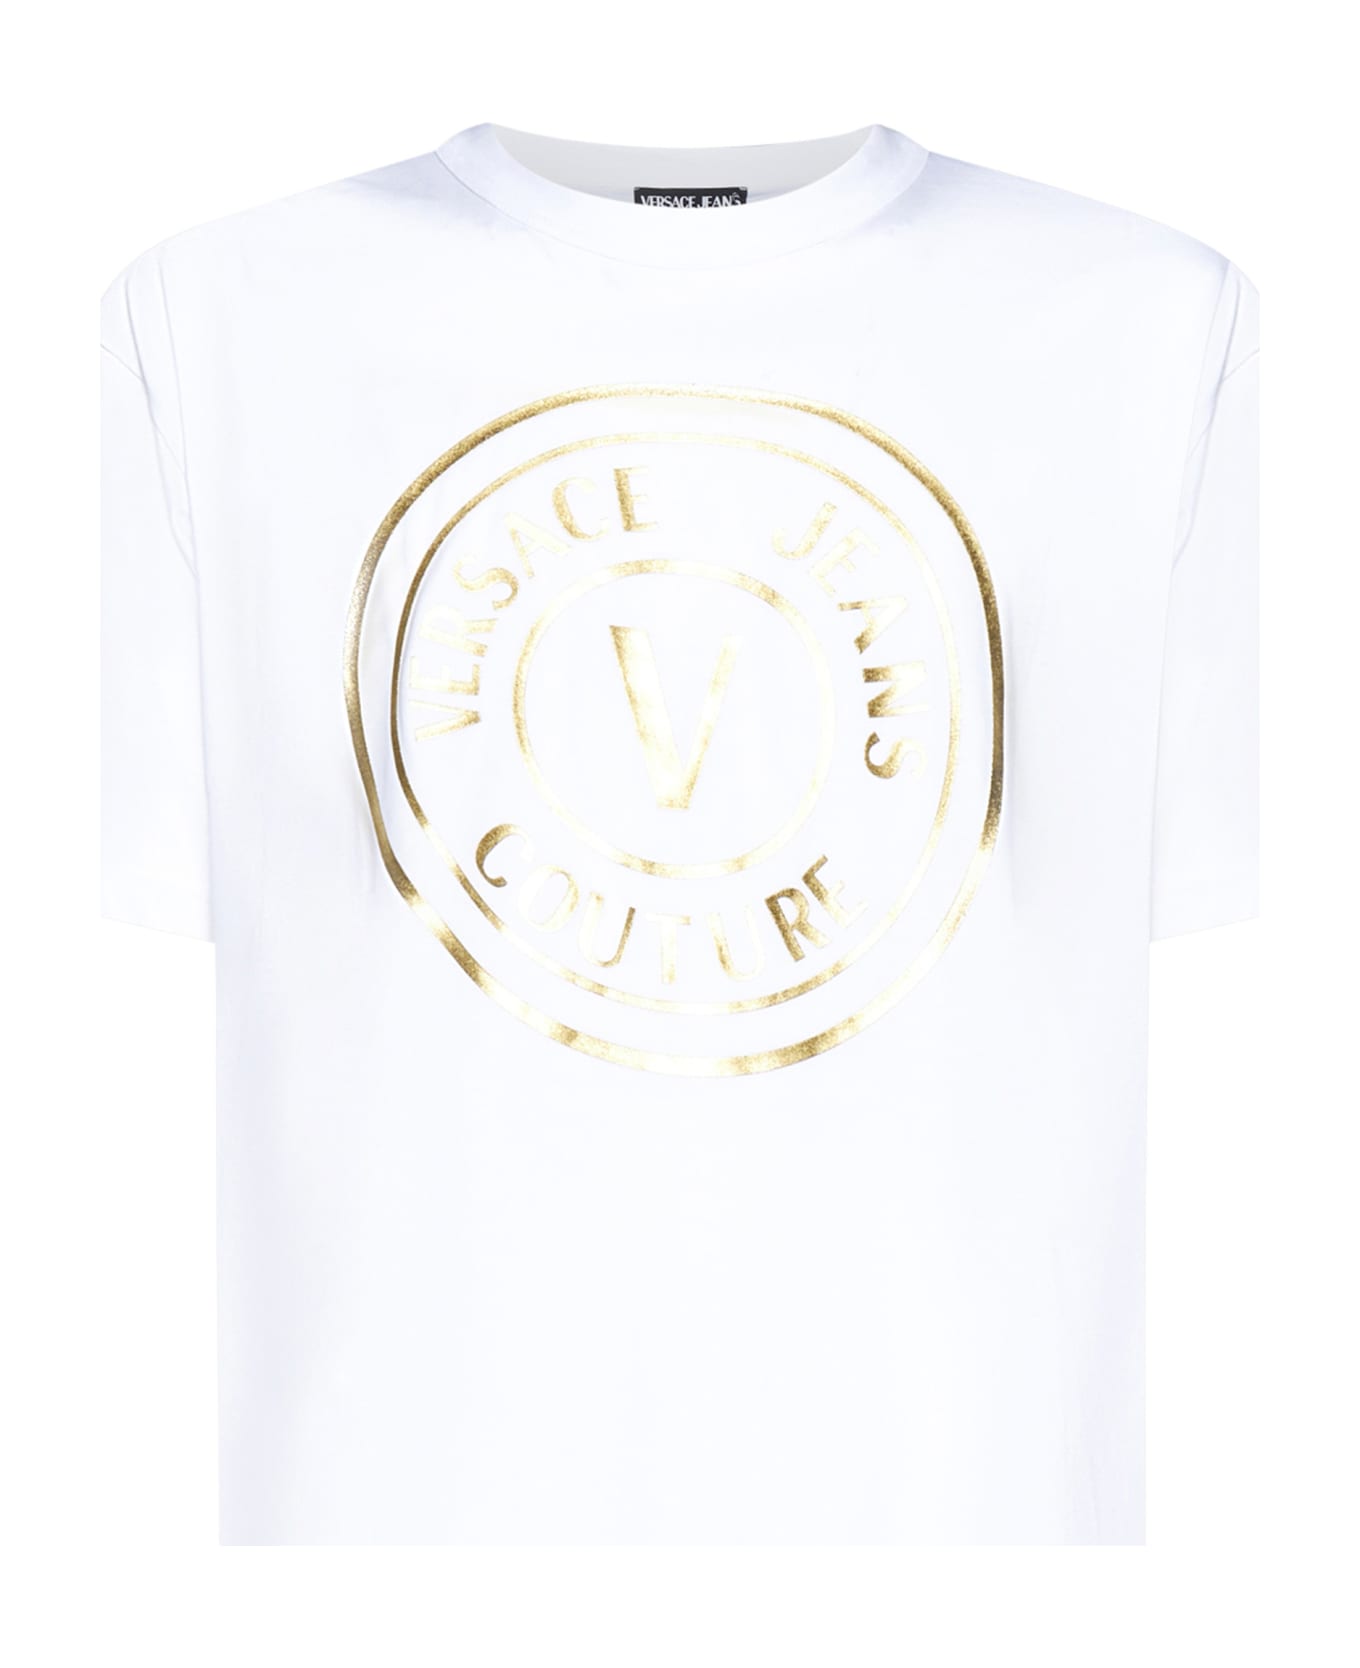 Versace Jeans Couture T-Shirt - White gold